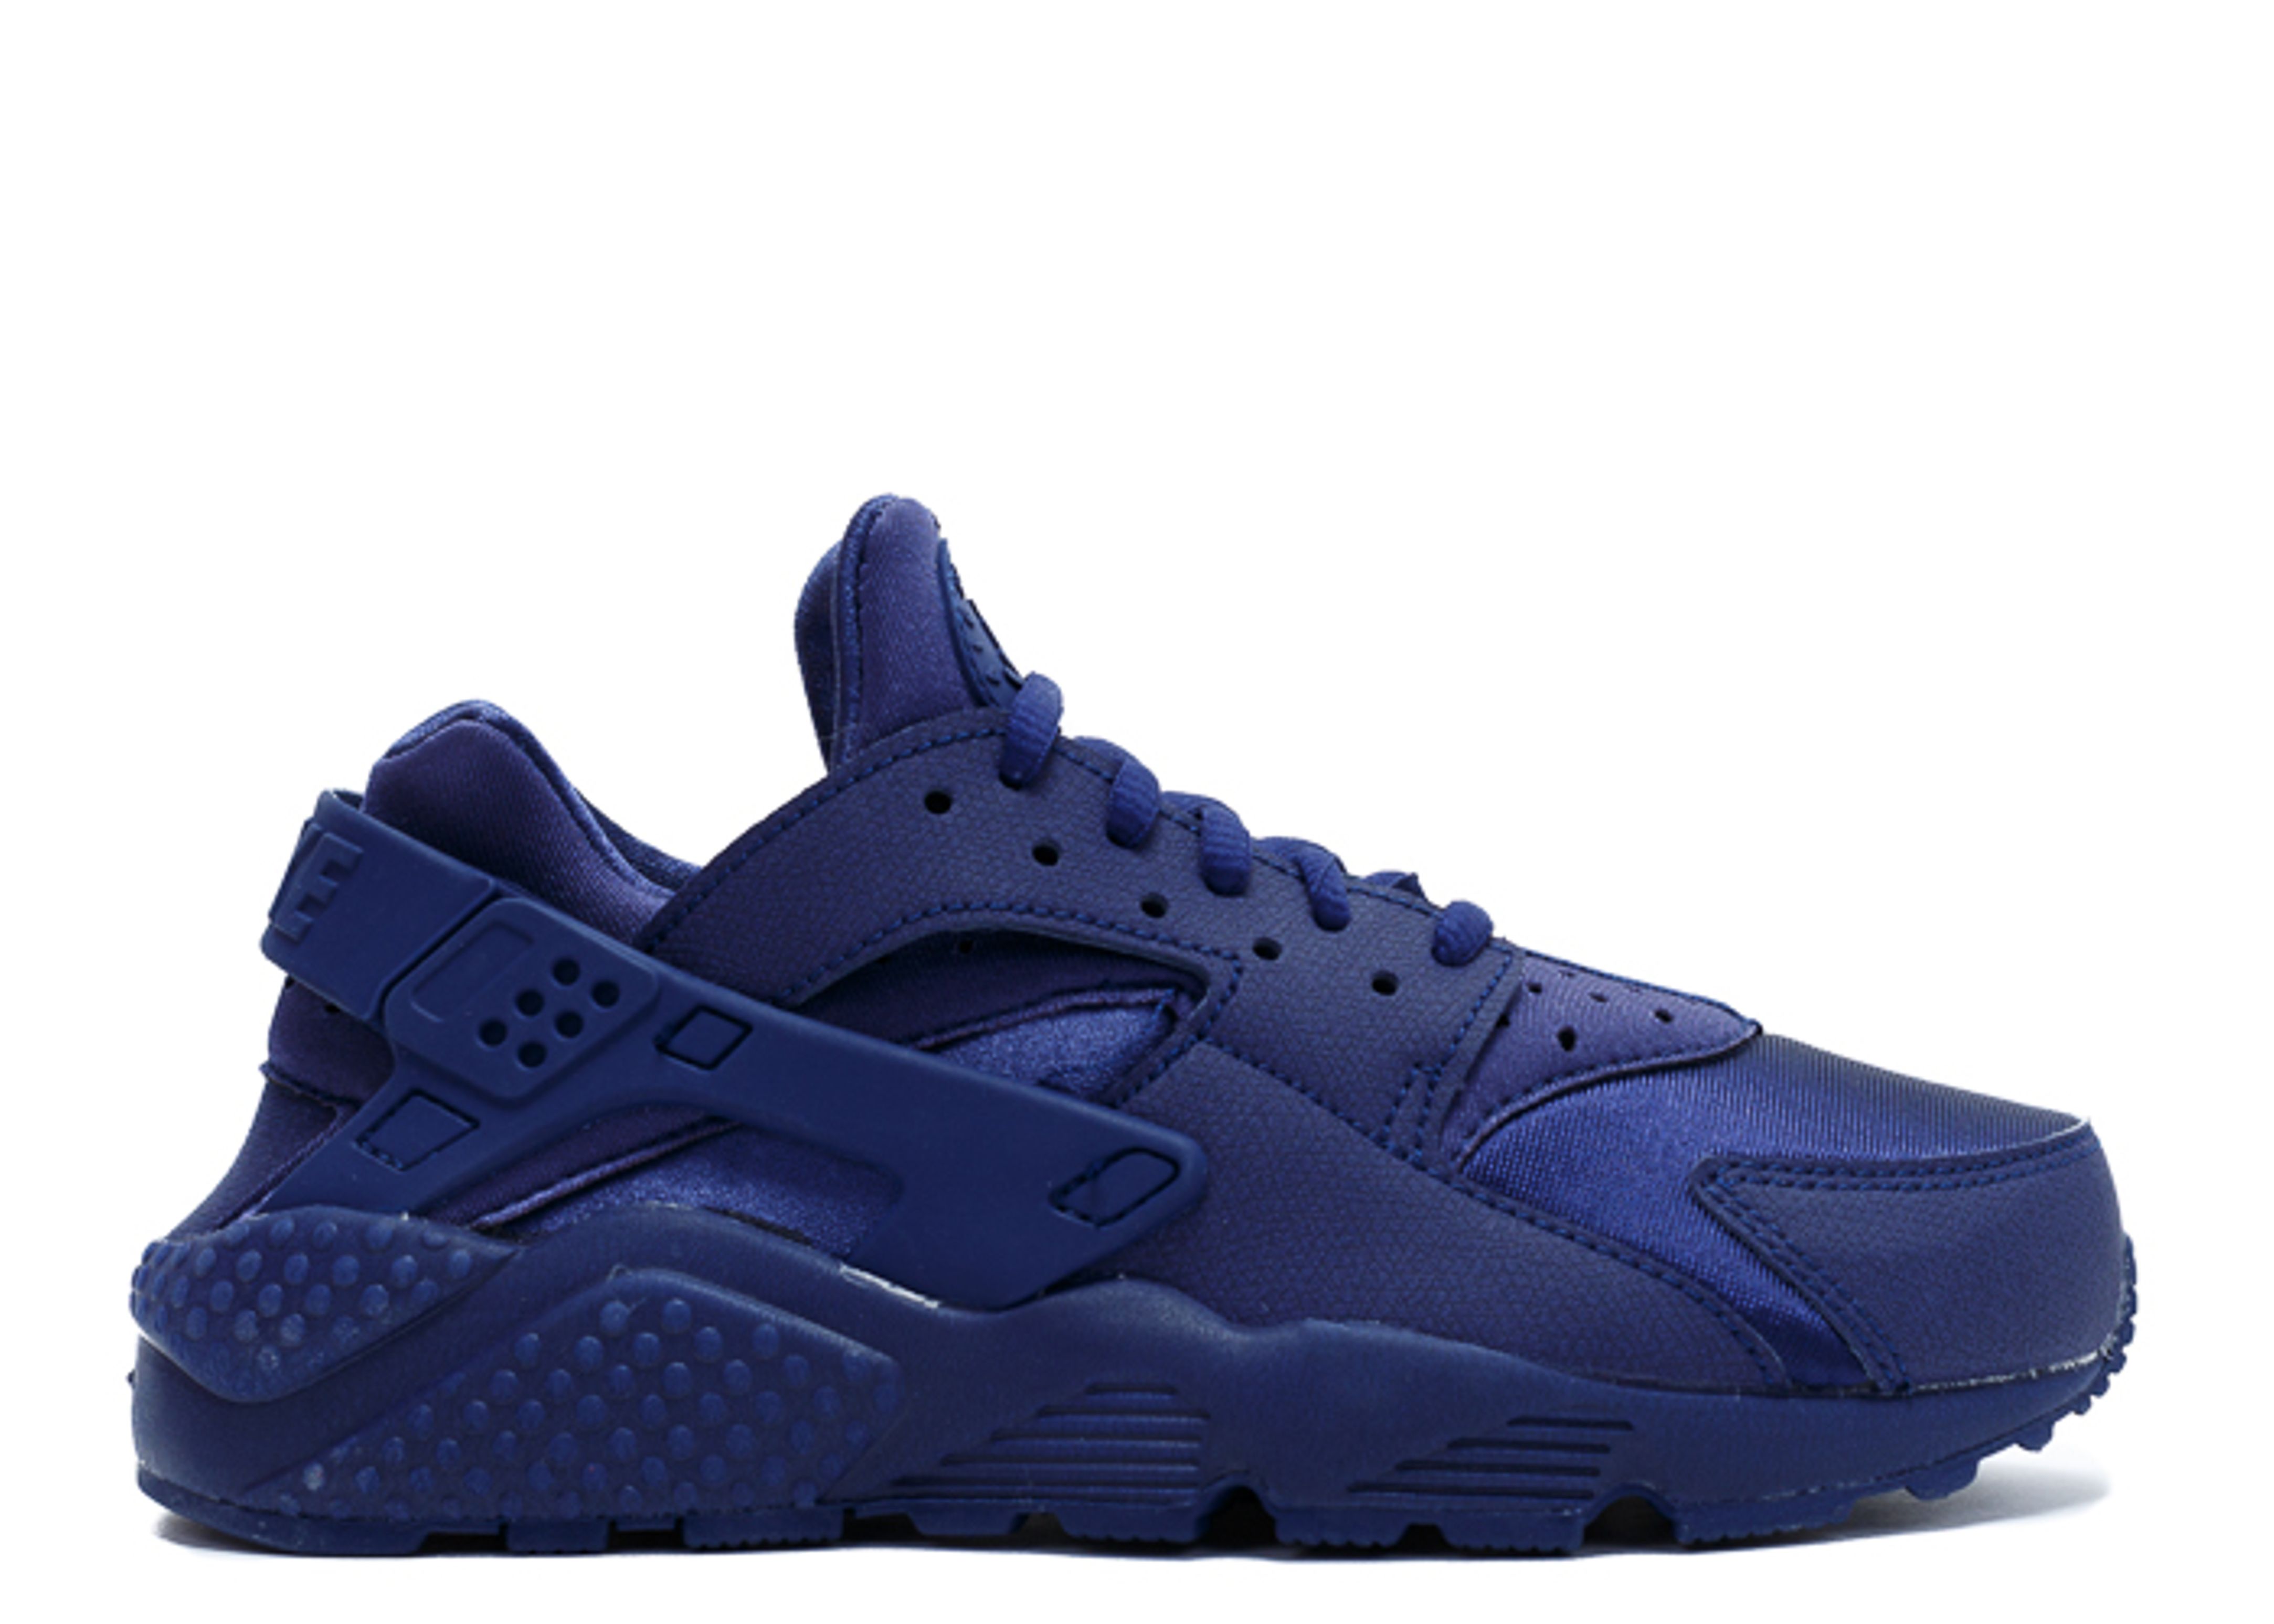 Buy Online black and blue huaraches 